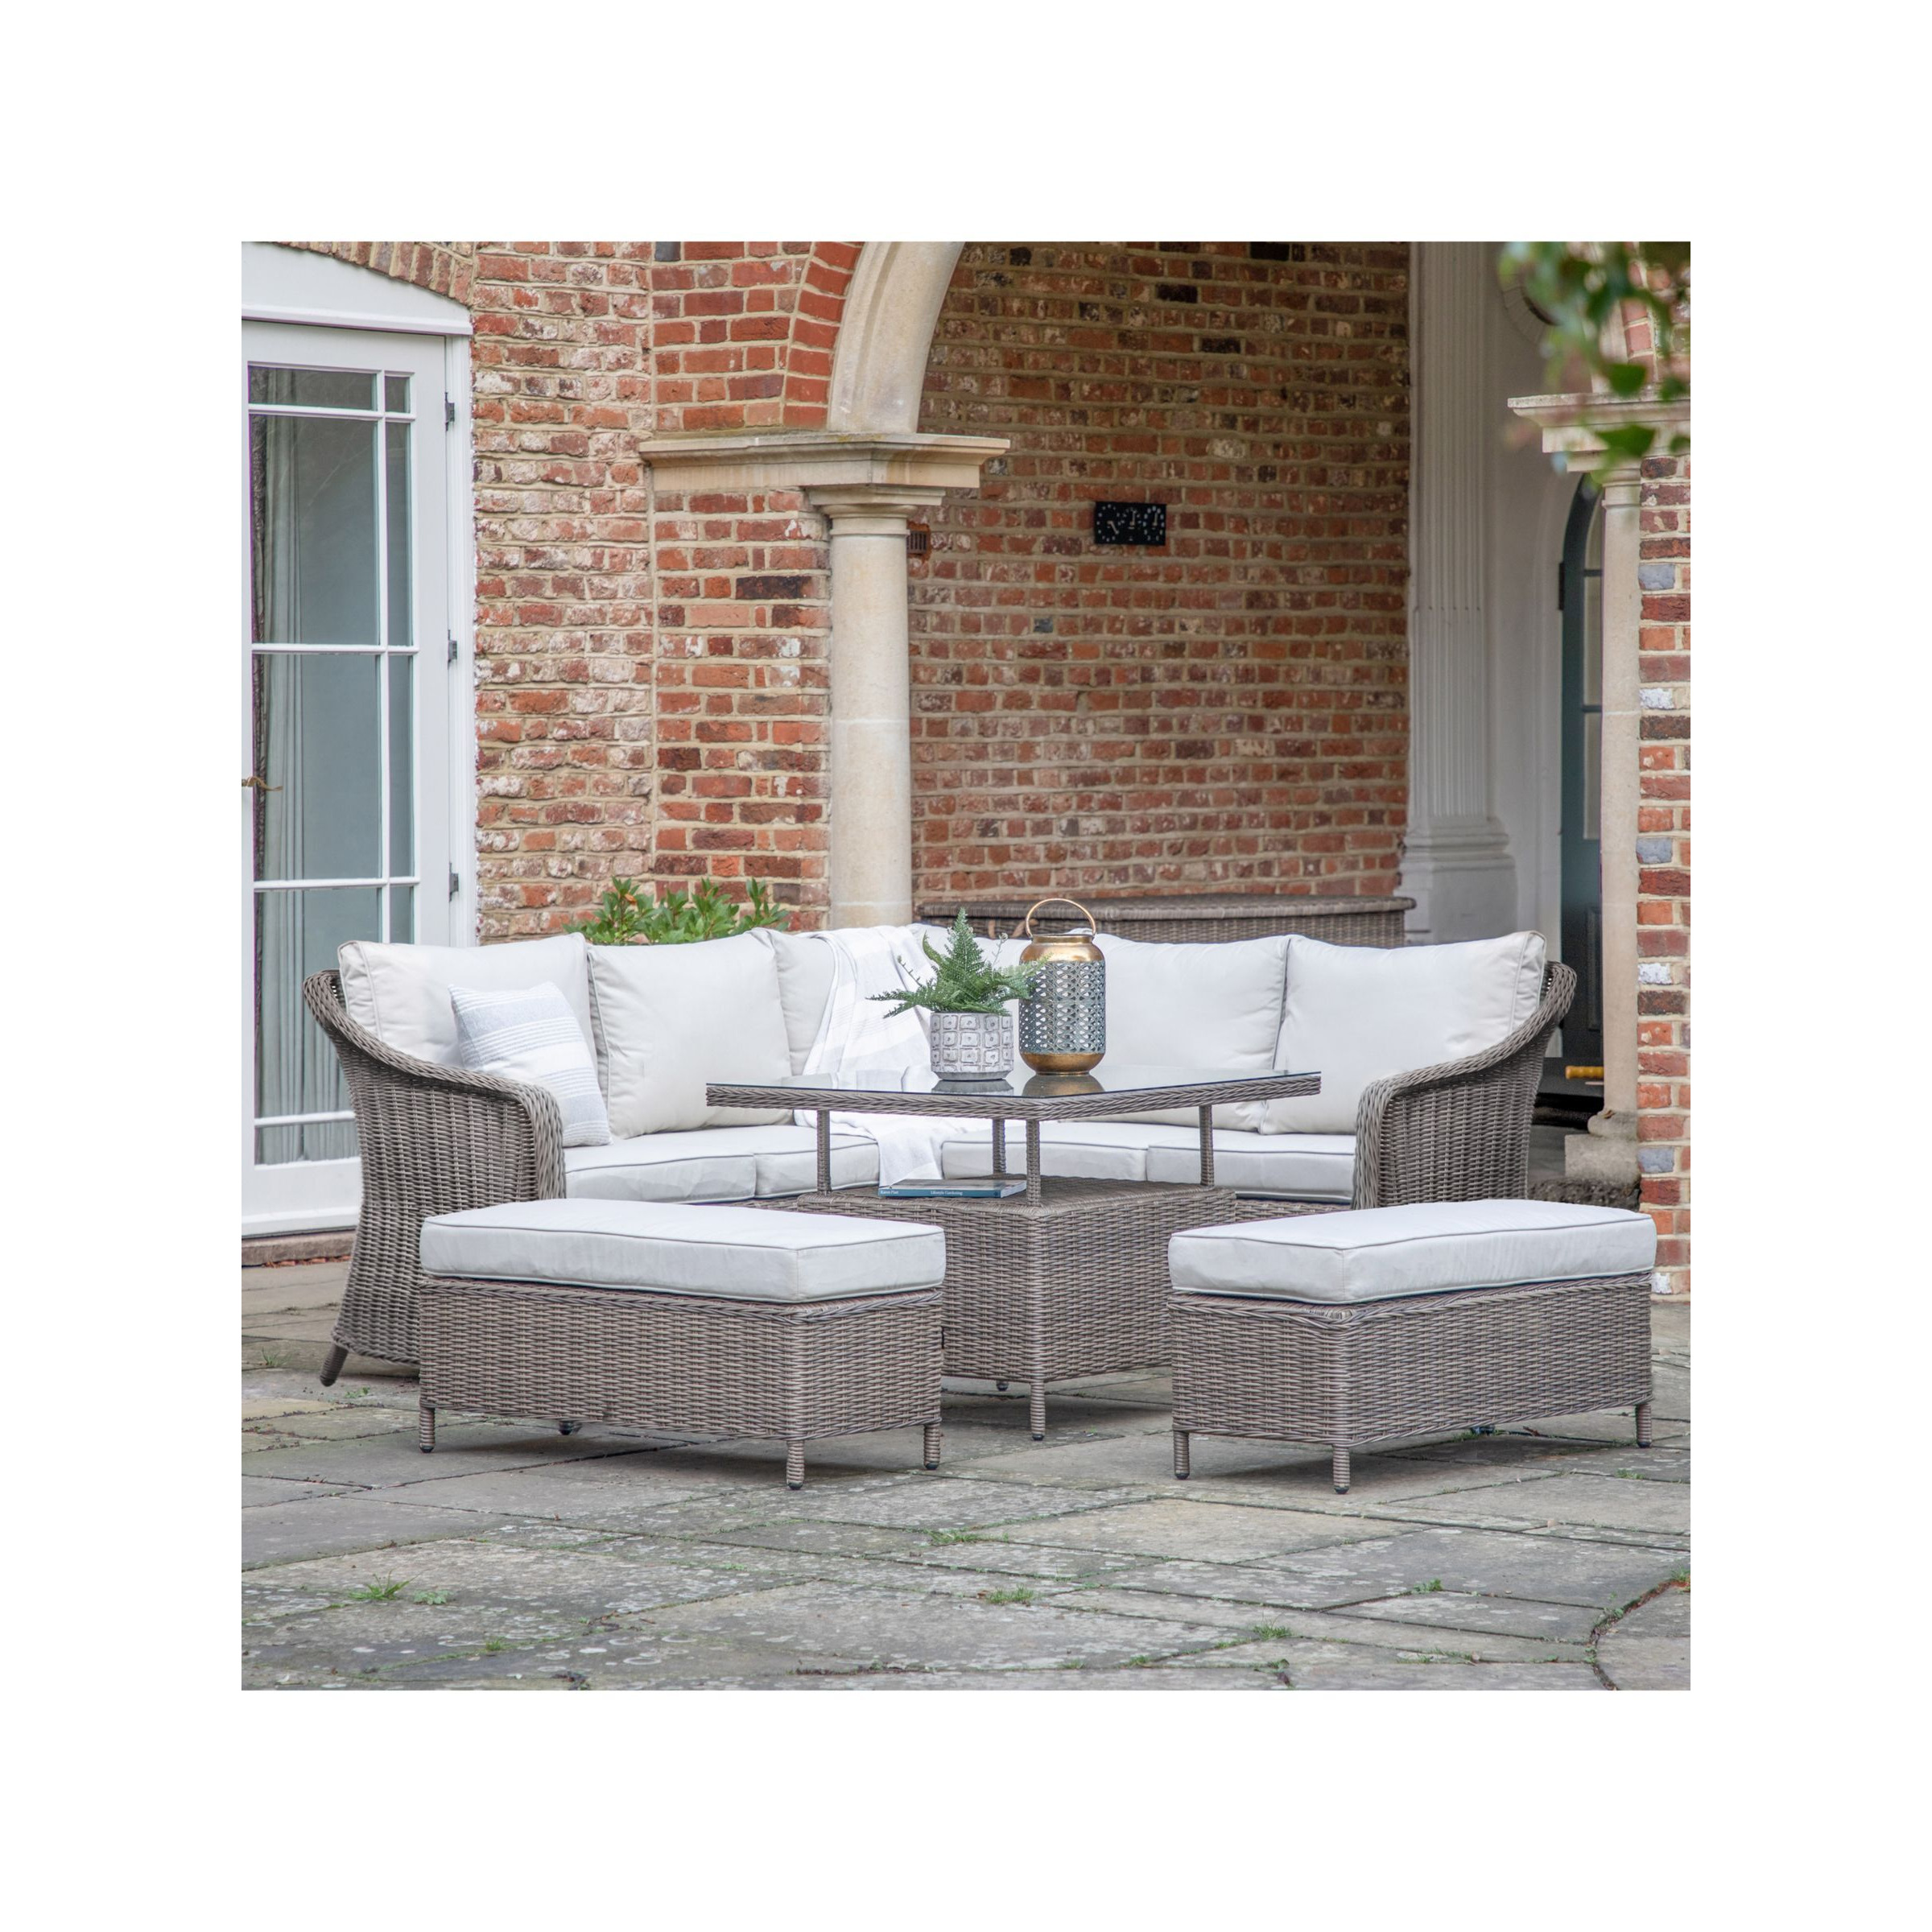 Gallery Direct Milson 8-Seater Height-Adjustable Square Garden Dining/Lounge Table & Chairs Set, Natural